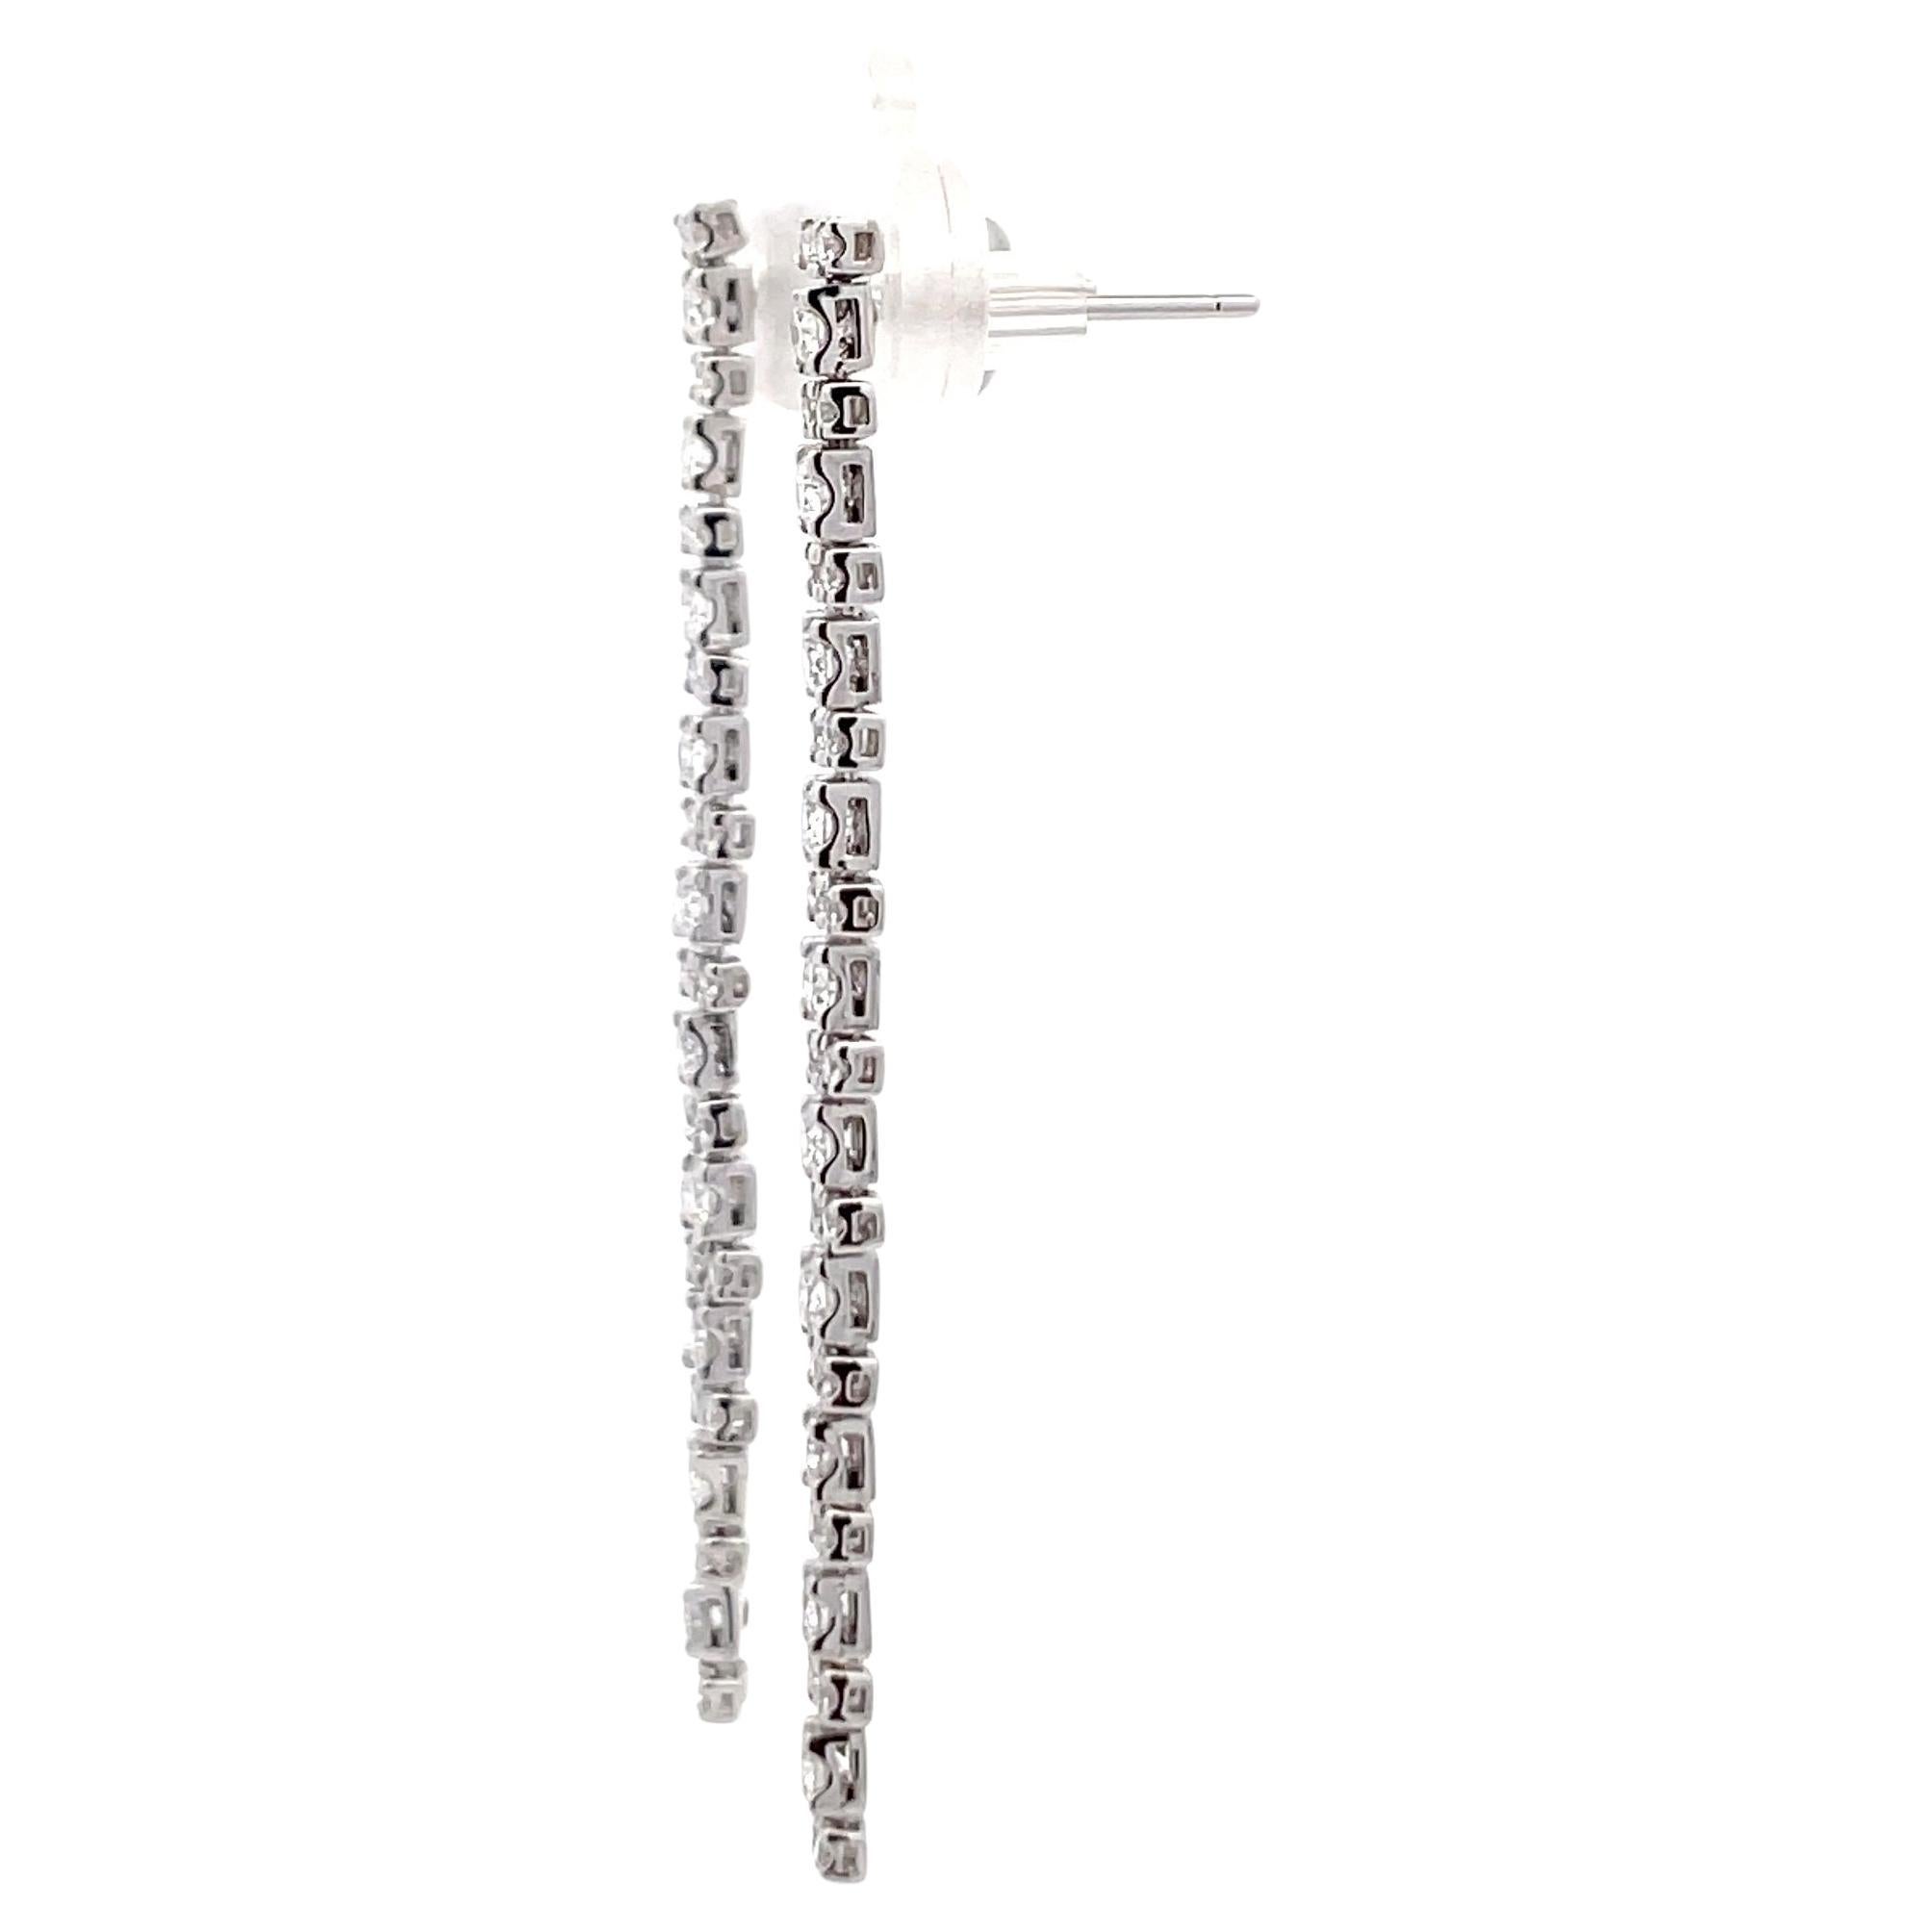 18 Karat white gold dangle drop earrings featuring two rows of 64 round brilliant weighing 1.05 carats.
Color G
Clarity SI